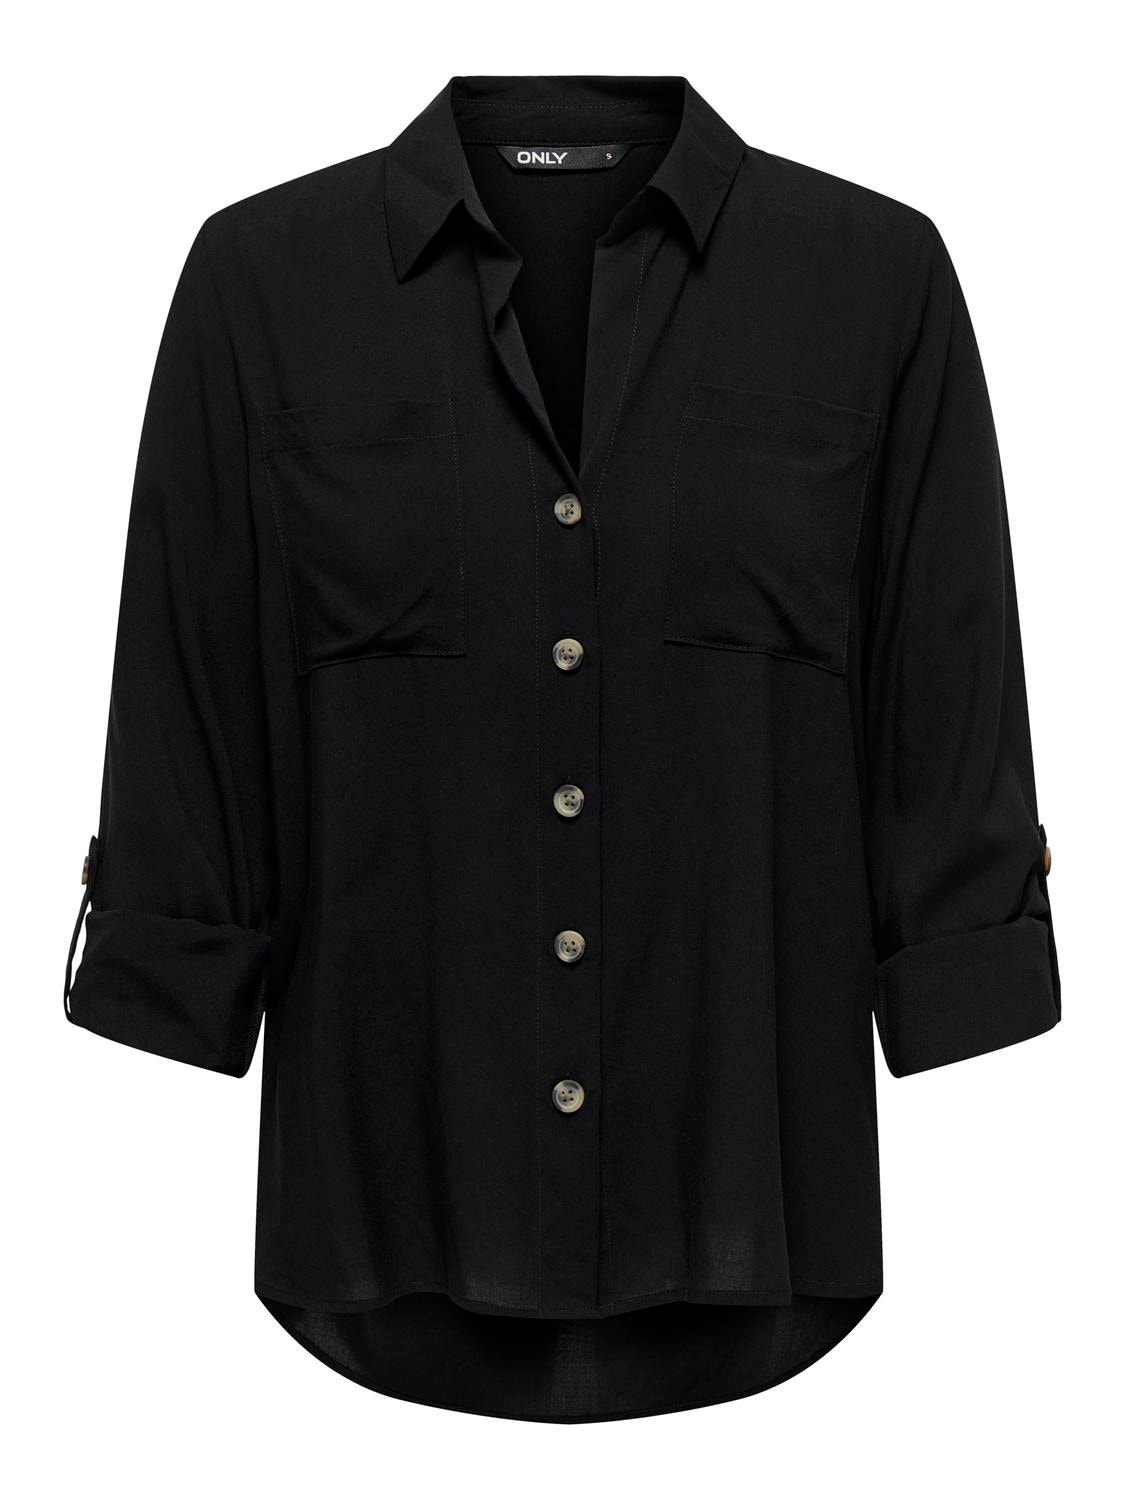 ONLY Shirt with rolled rolled up sleeves -Black - 15281677